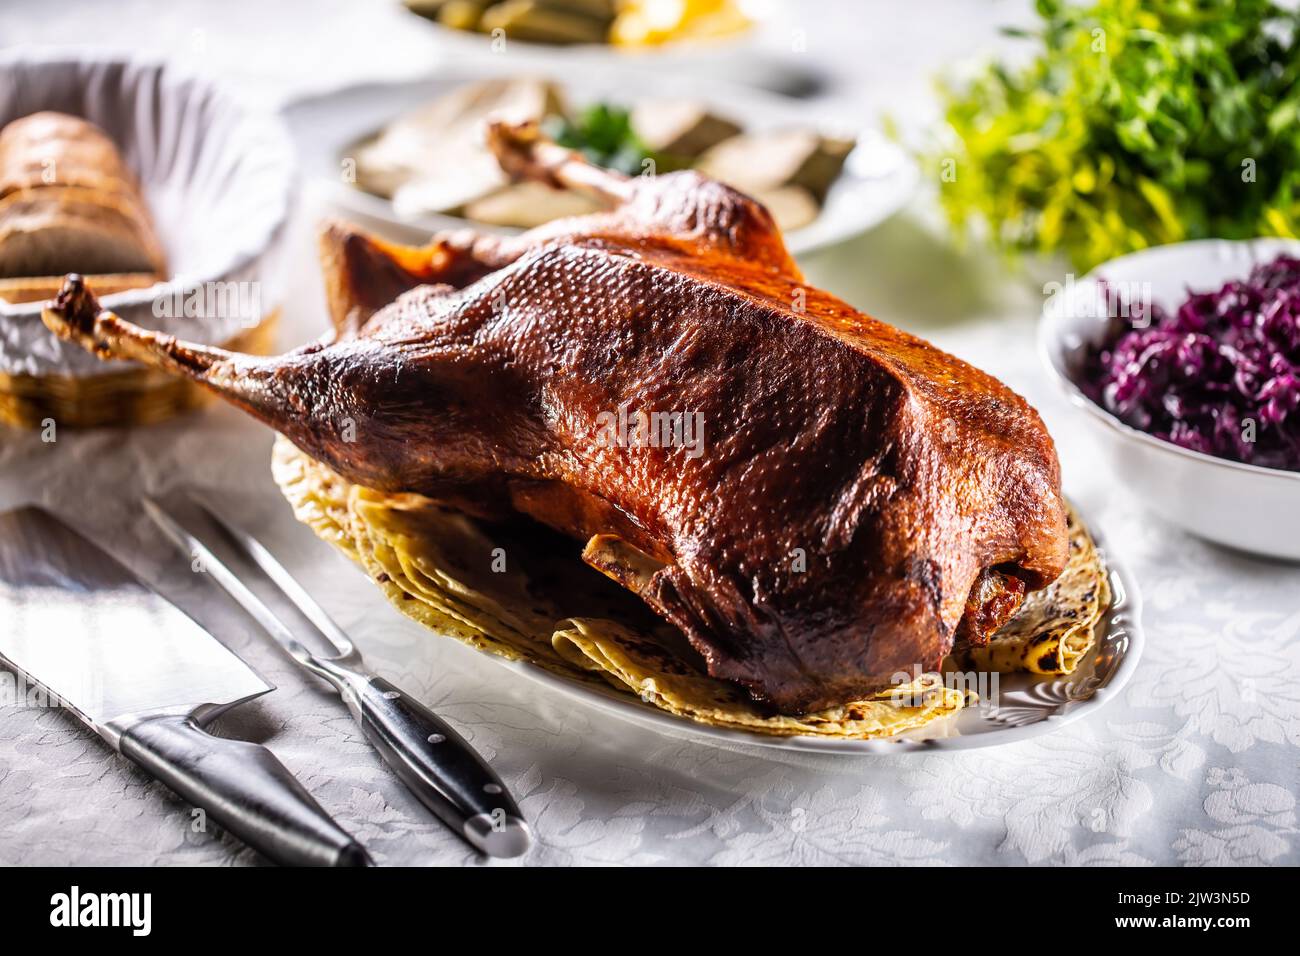 Roast goose with side dishes, red cabbage, roast, strudel, potato dumplings, pickles and bread. Stock Photo